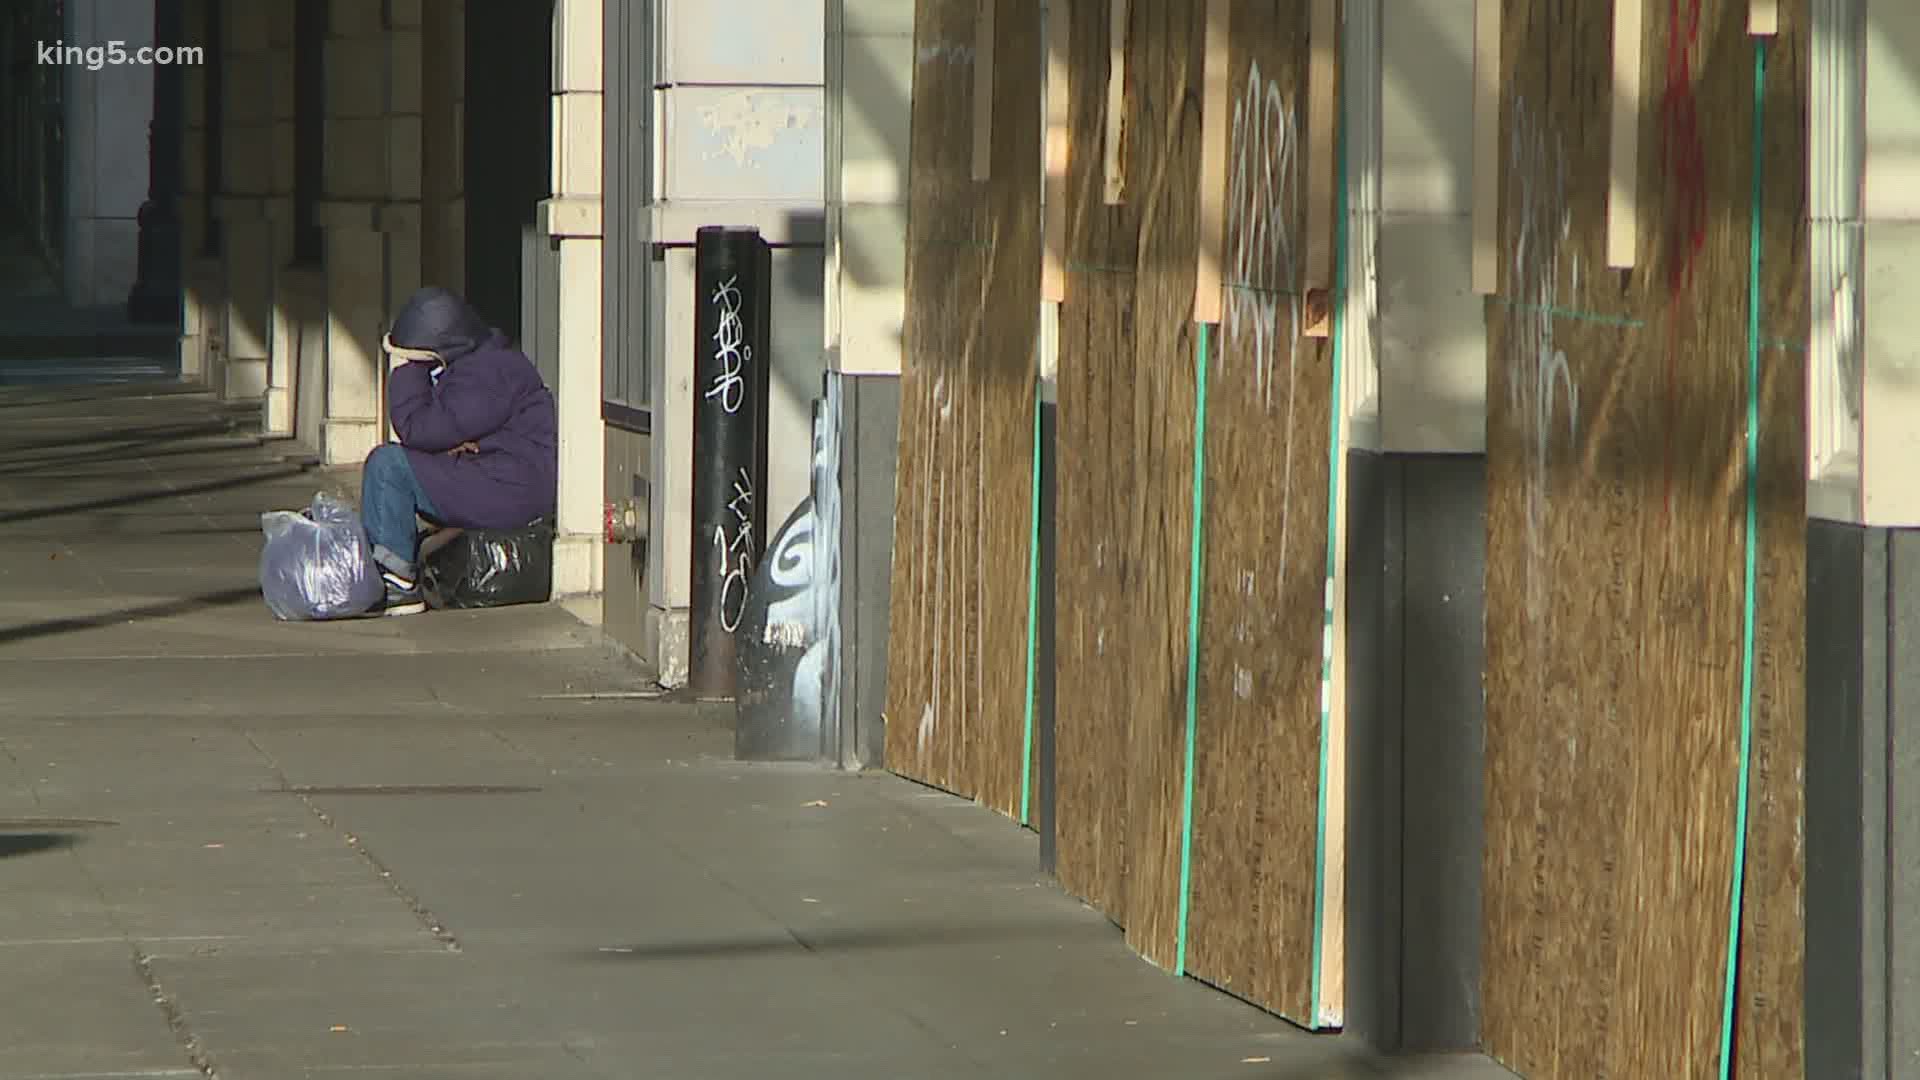 It's become difficult to find a public restroom, amid widespread closures. The city of Seattle and nonprofits are trying to provide some relief for the homeless.